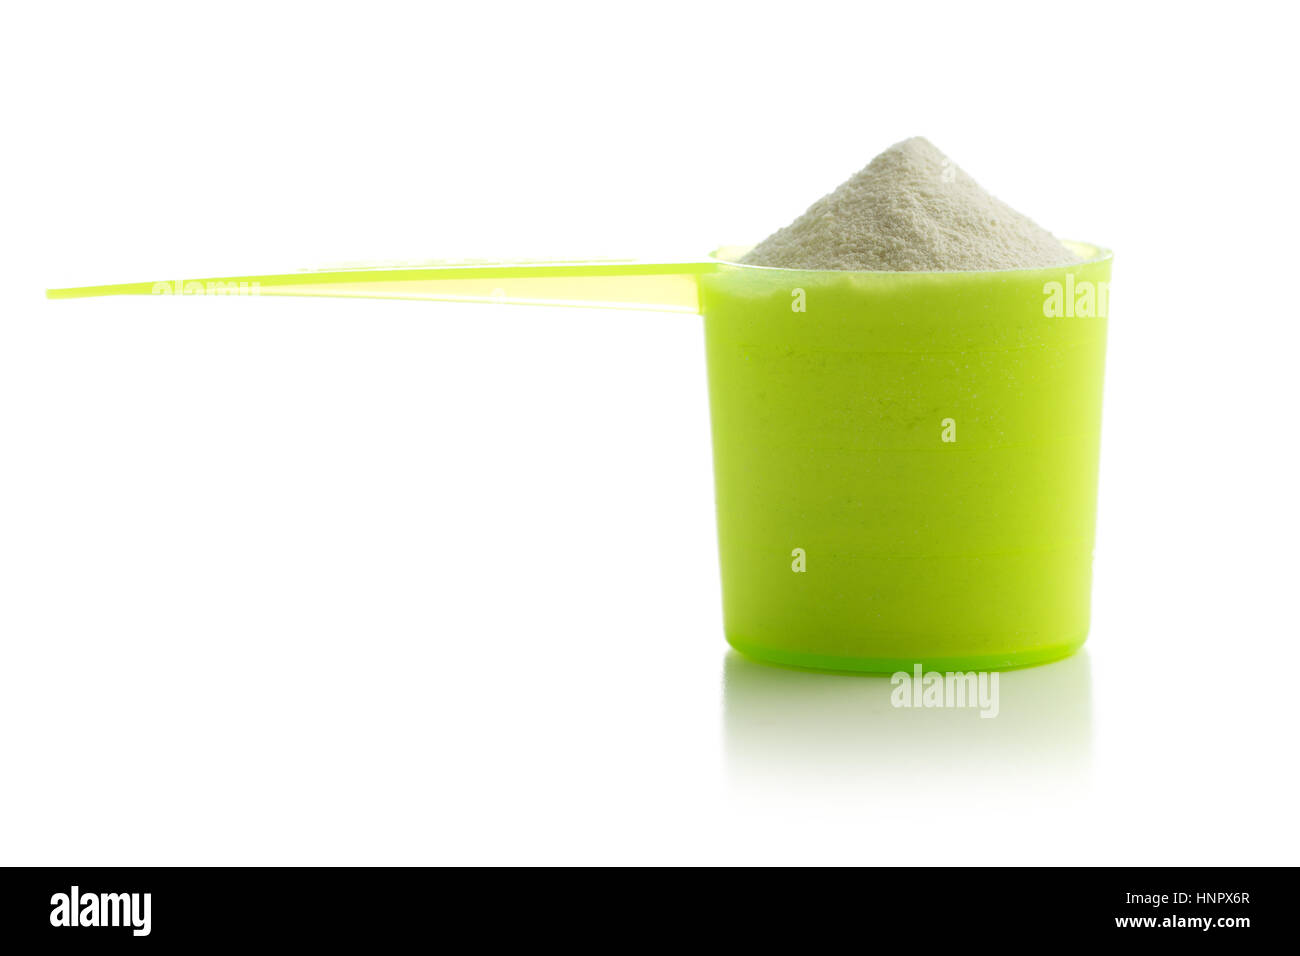 https://c8.alamy.com/comp/HNPX6R/whey-protein-powder-isolated-on-white-background-HNPX6R.jpg